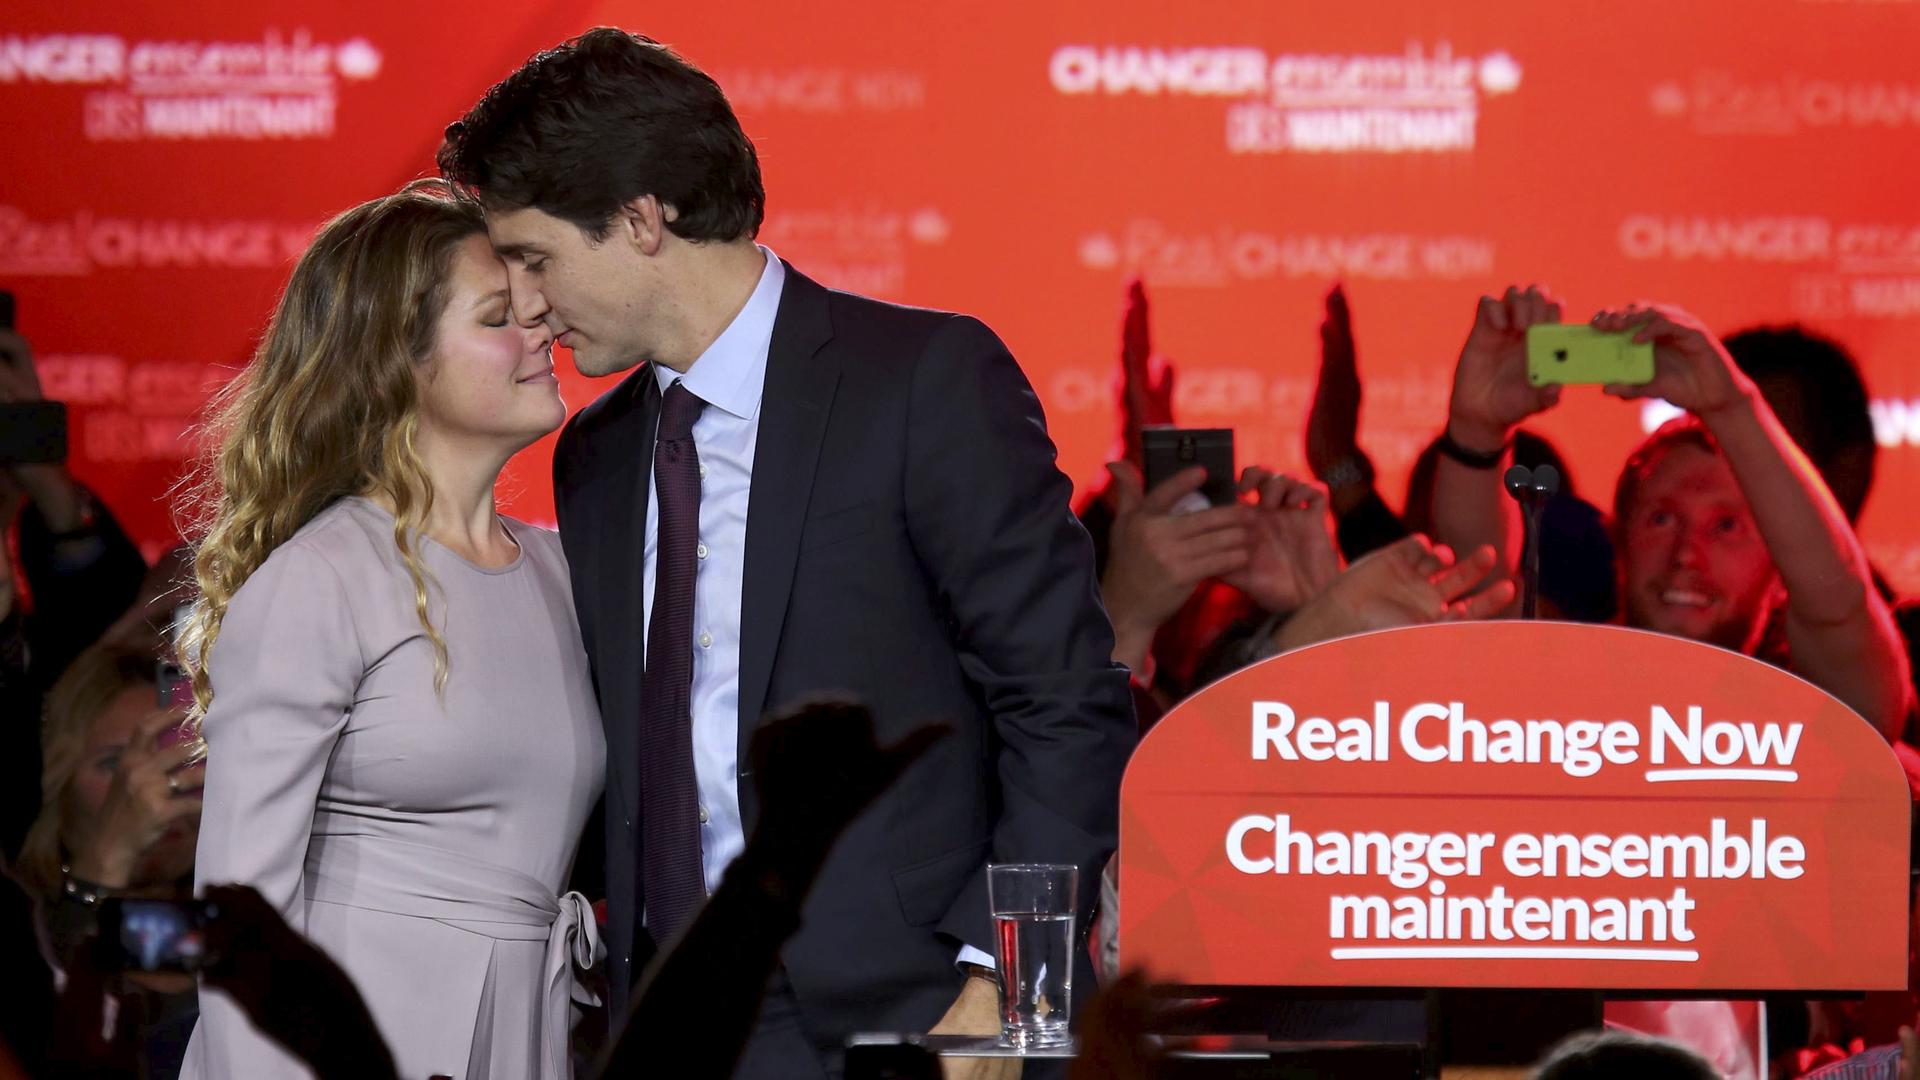 Liberal Party leader Justin Trudeau shares a moment with his wife Sophie Gregoire on a stage in Montreal, after he became the first child of a Canadian Prime Minister to also become Prime Minister